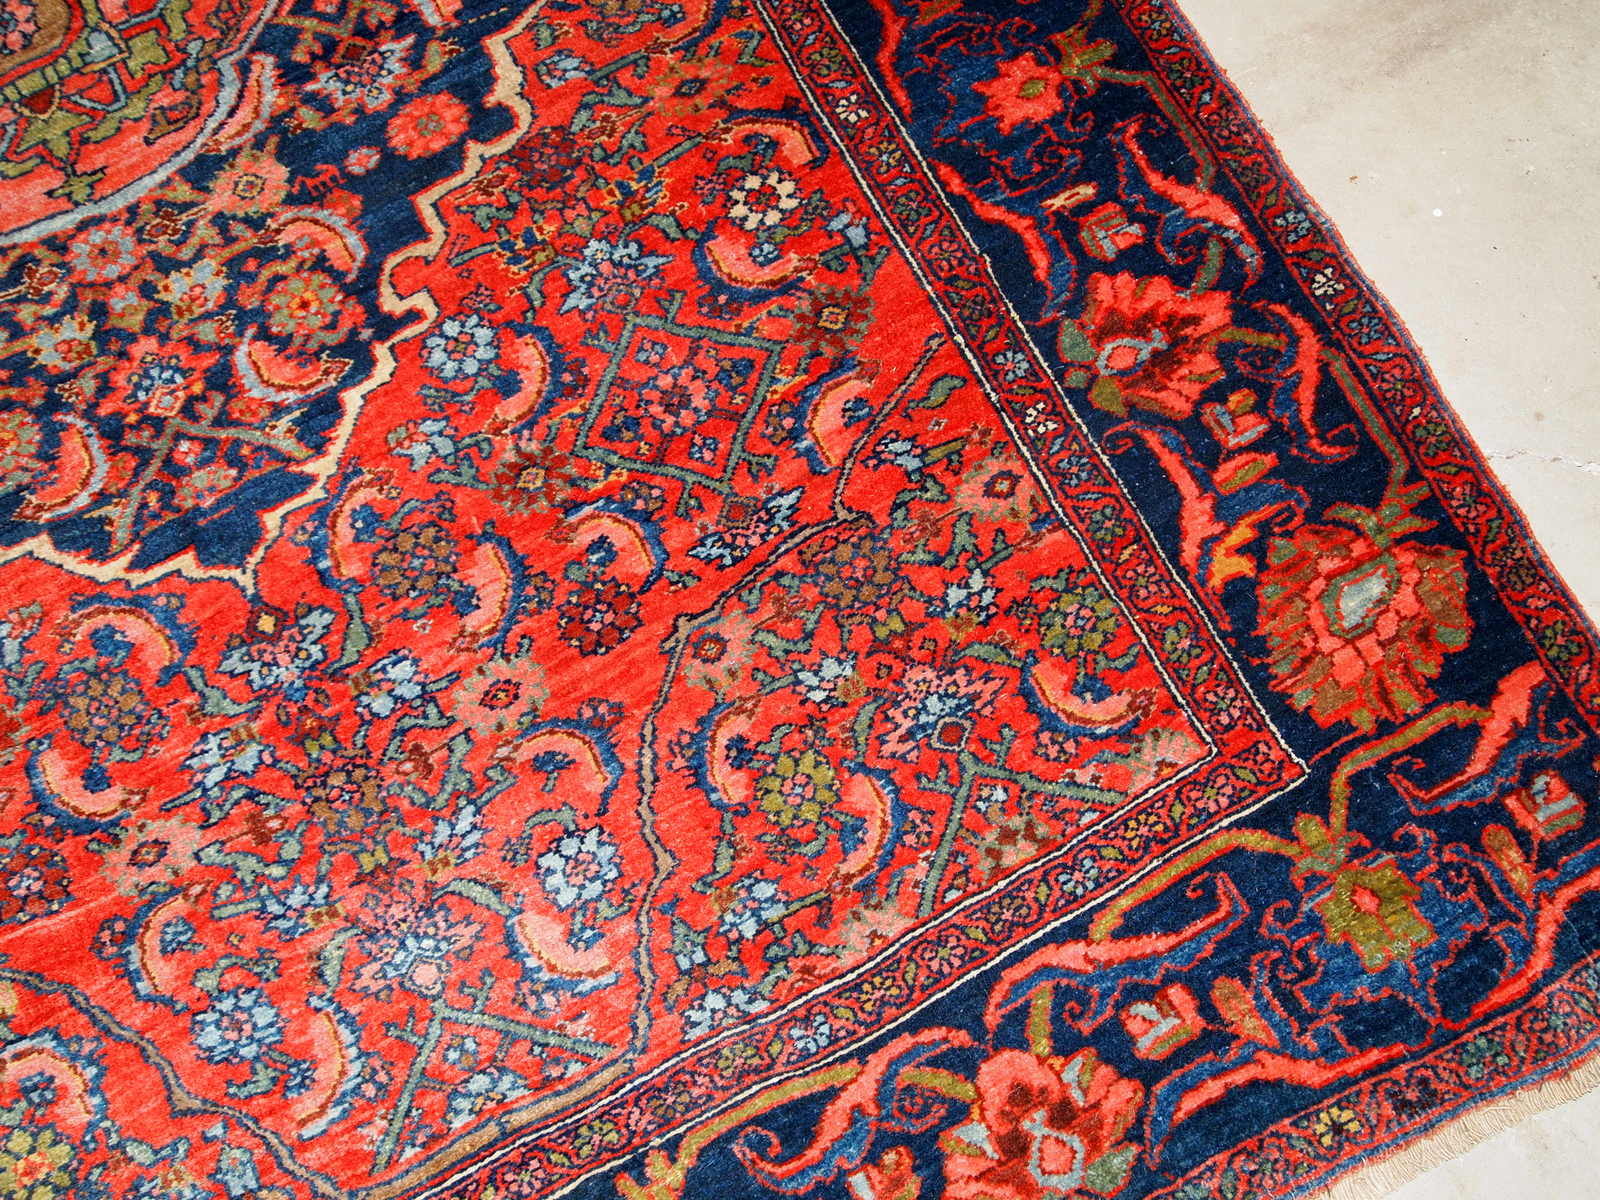 Handmade antique Bidjar rug from the beginning of 20th century. The rug is in original good condition made in bright red wool.